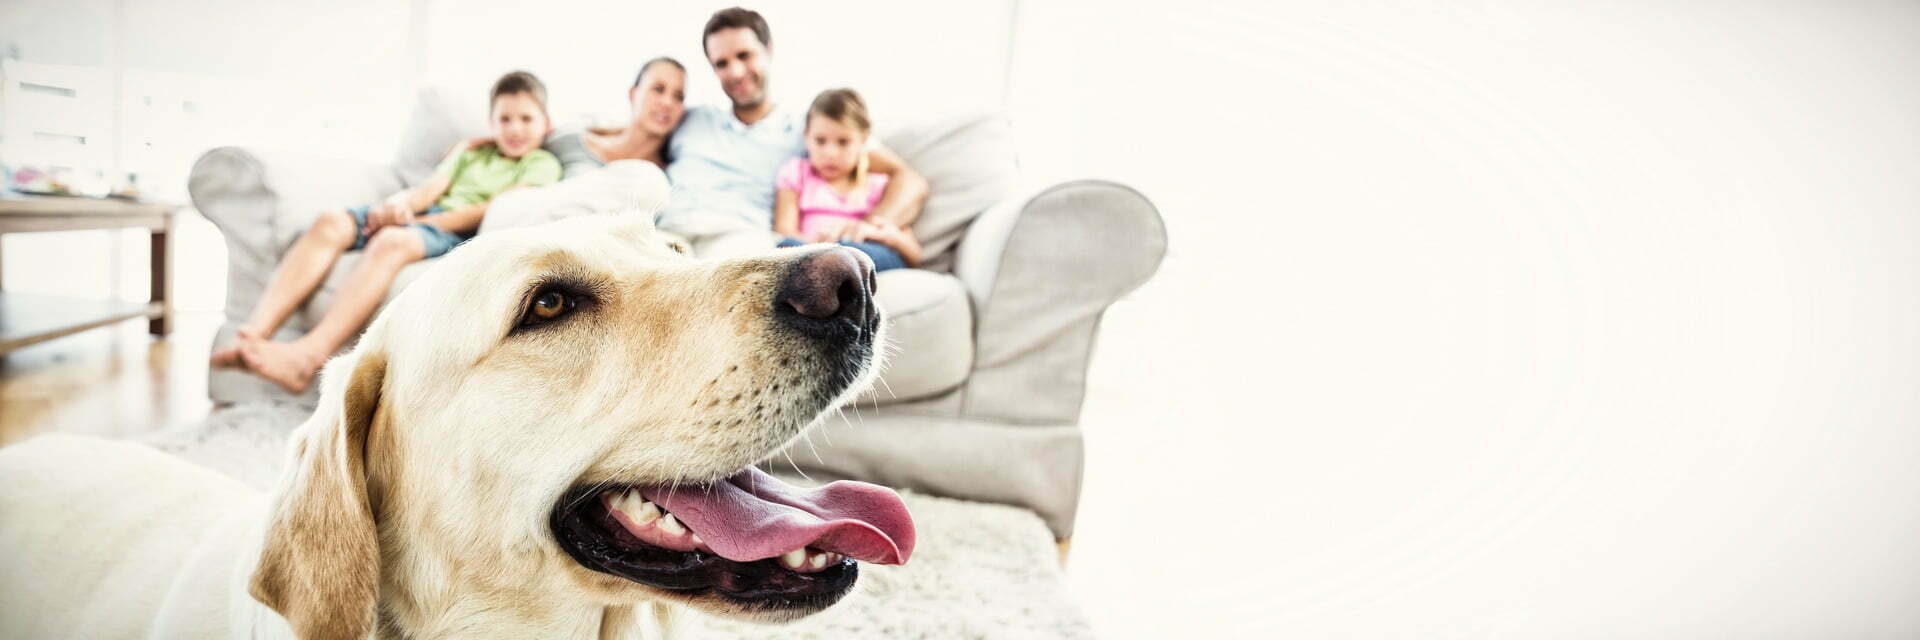 Picture of Family With Dog in Clean Home